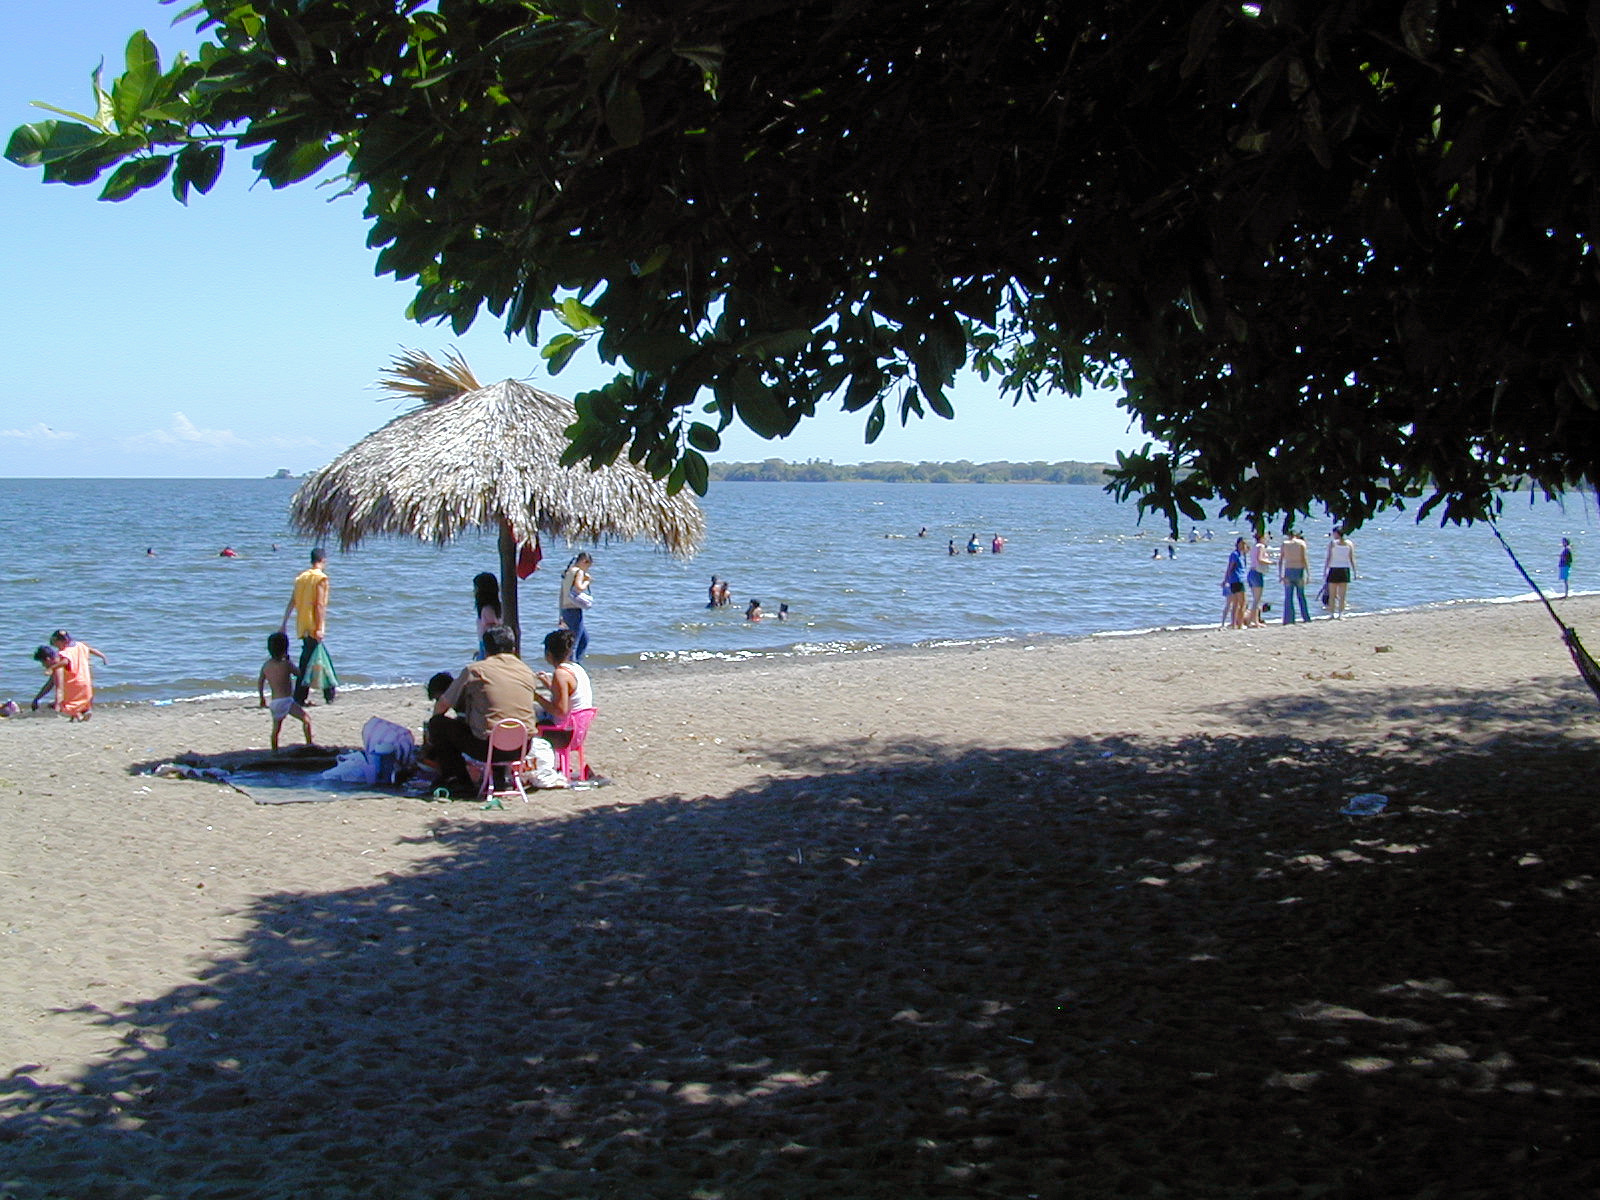 Nearly the size of Connecticut, Lake Nicaragua provides great fishing, boating, and swimming